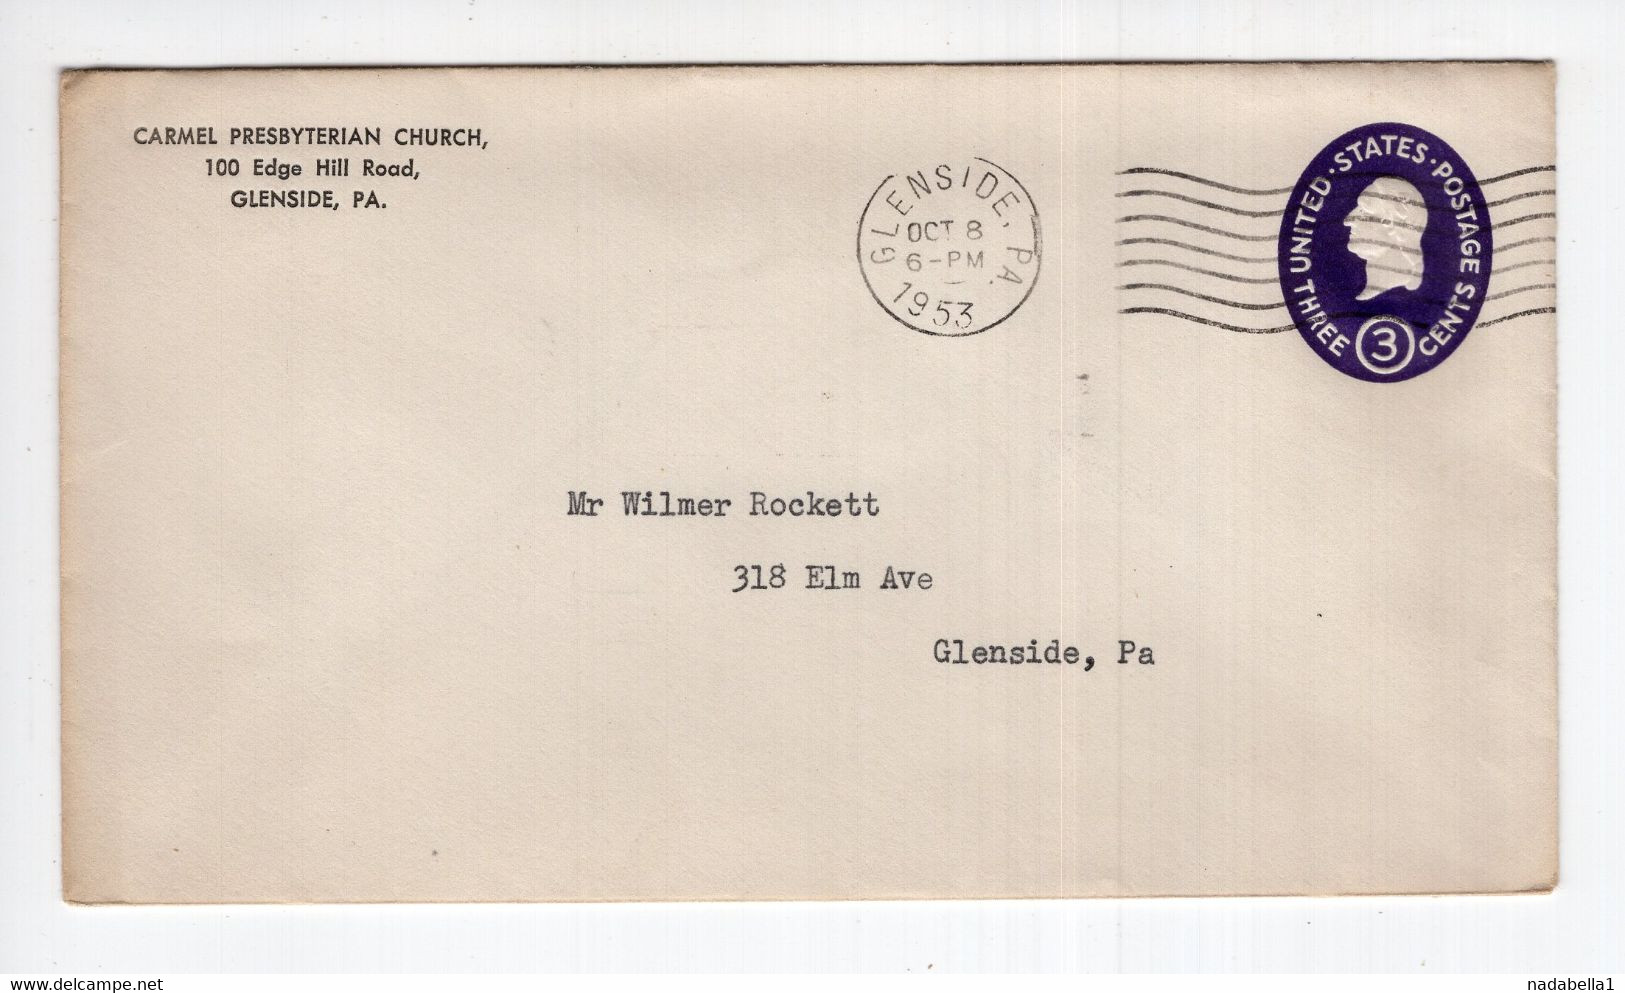 1953. UNITED STATES,GLENSIDE PA. LOCAL,CARMEL PRESBYTERIAN CHURCH HEADED COVER,3 CENTS STATIONERY STAMPED COVER - 1941-60